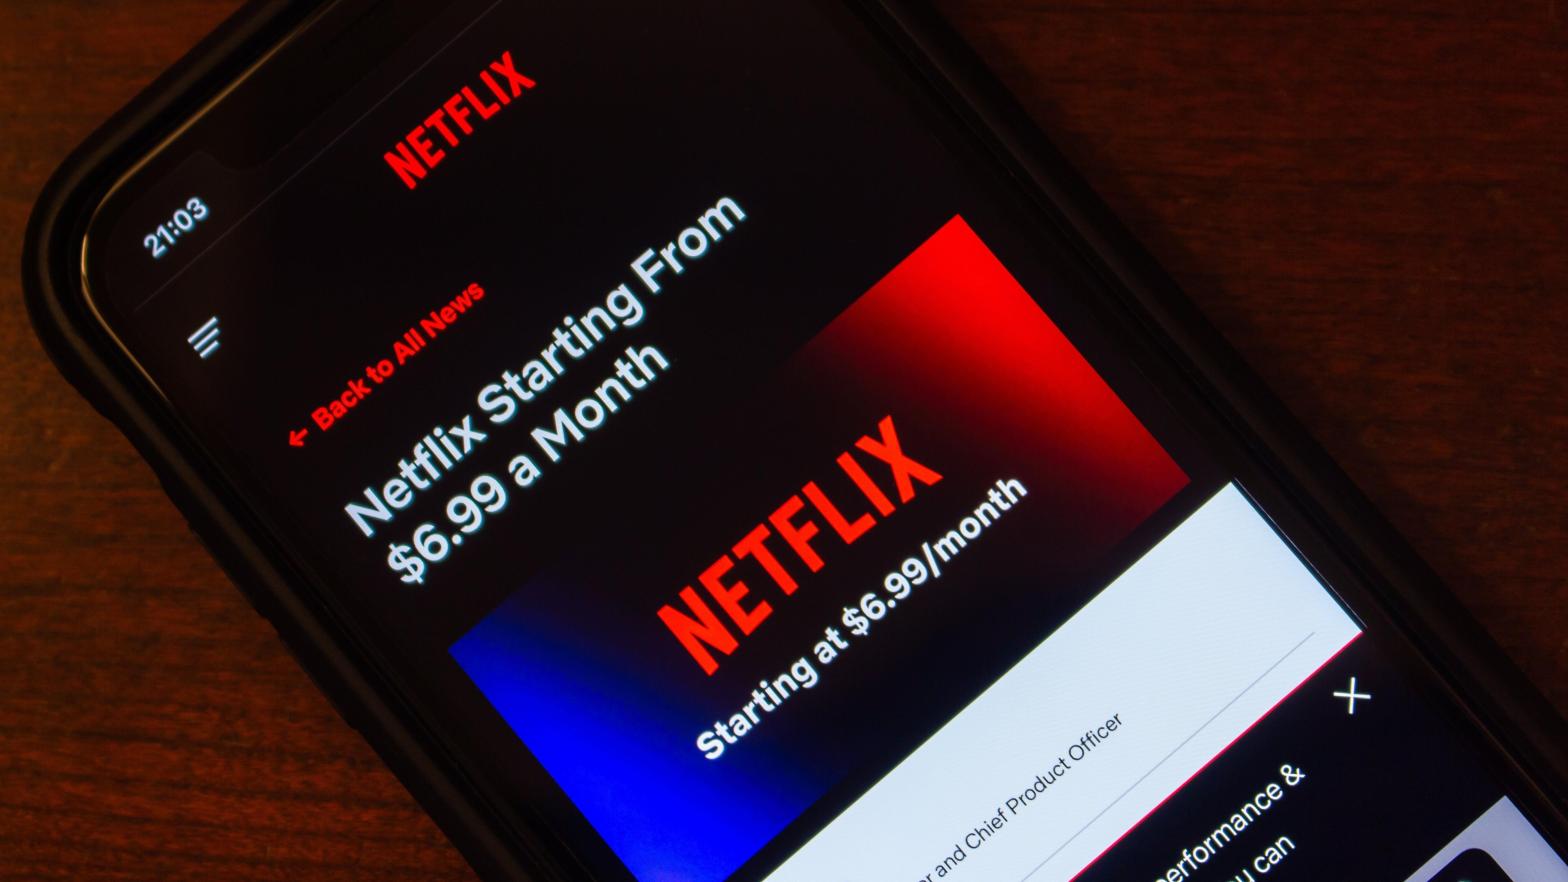 Netflix has touted its cheaper ad-based tier as one of the ways it plans to offer more choice for subscribers and strengthen its long-term outlook. So far, data shows users haven't taken the bait. (Photo: Koshiro K, Shutterstock)